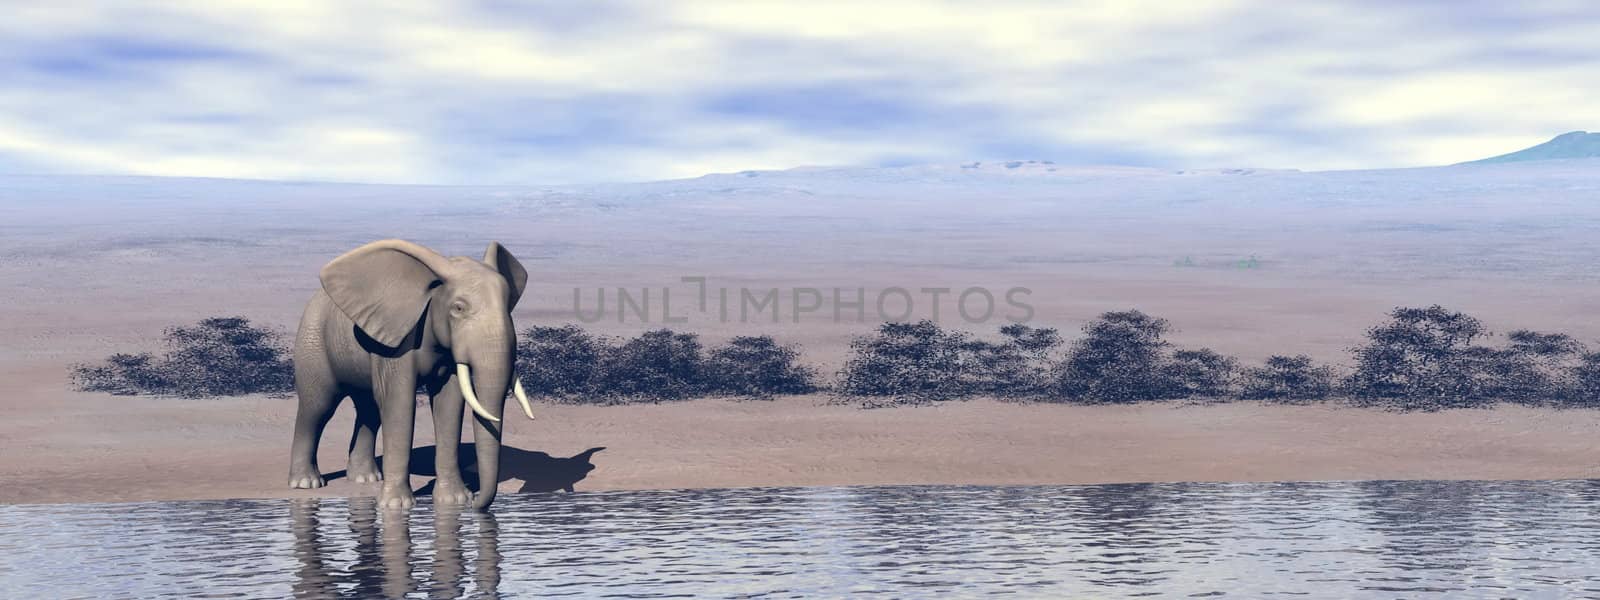 Elephant at the water - 3D render by Elenaphotos21